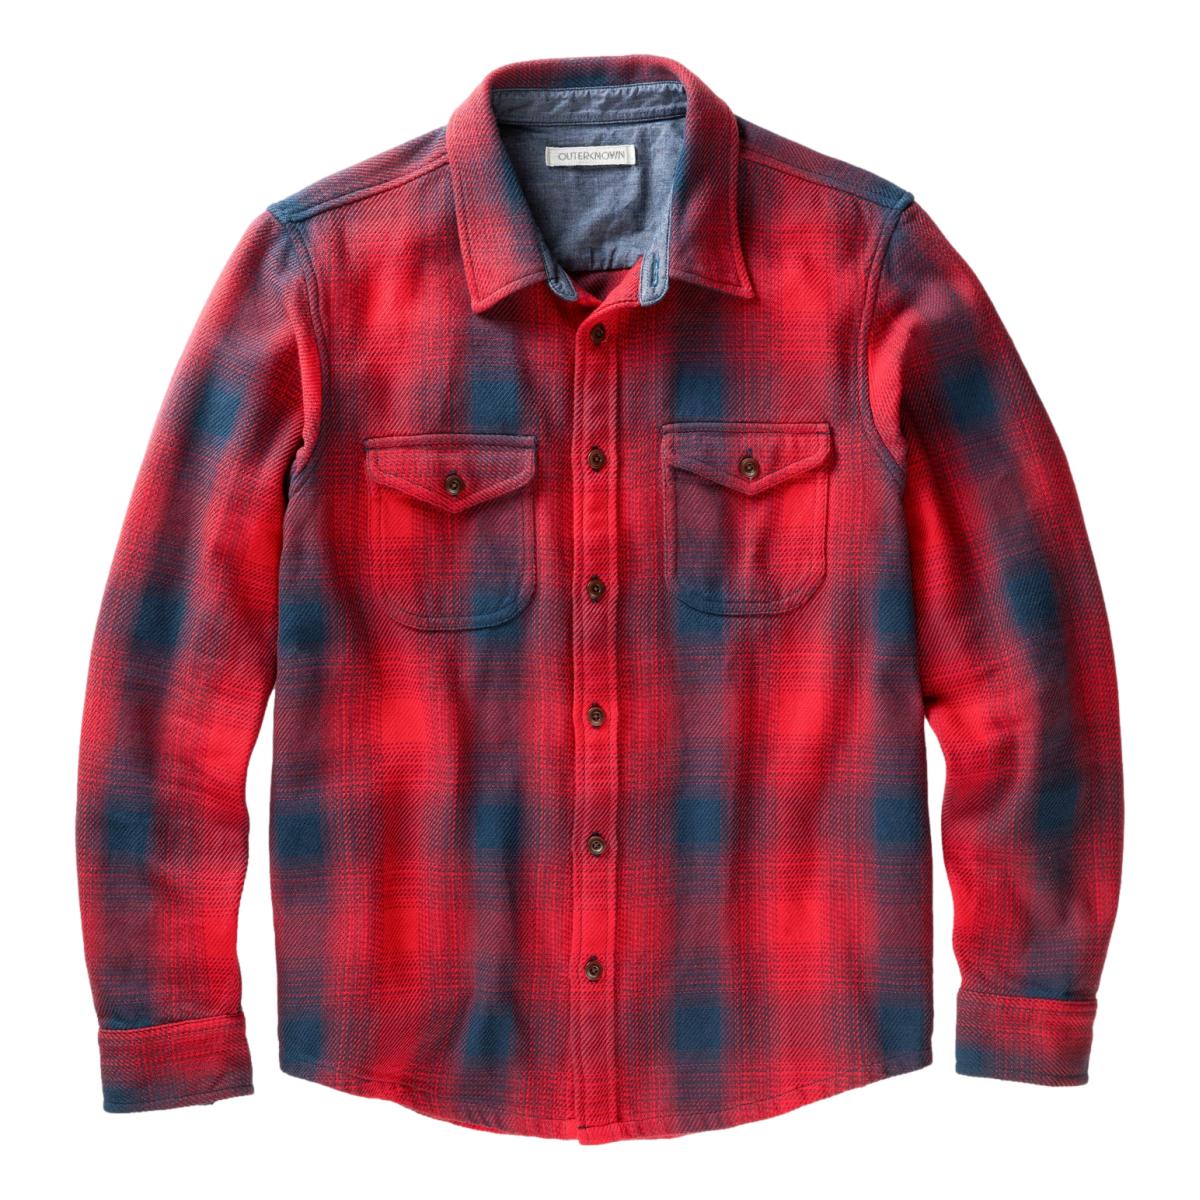 Blanket Shirt Safety Red Overlook Plaid - Shirts